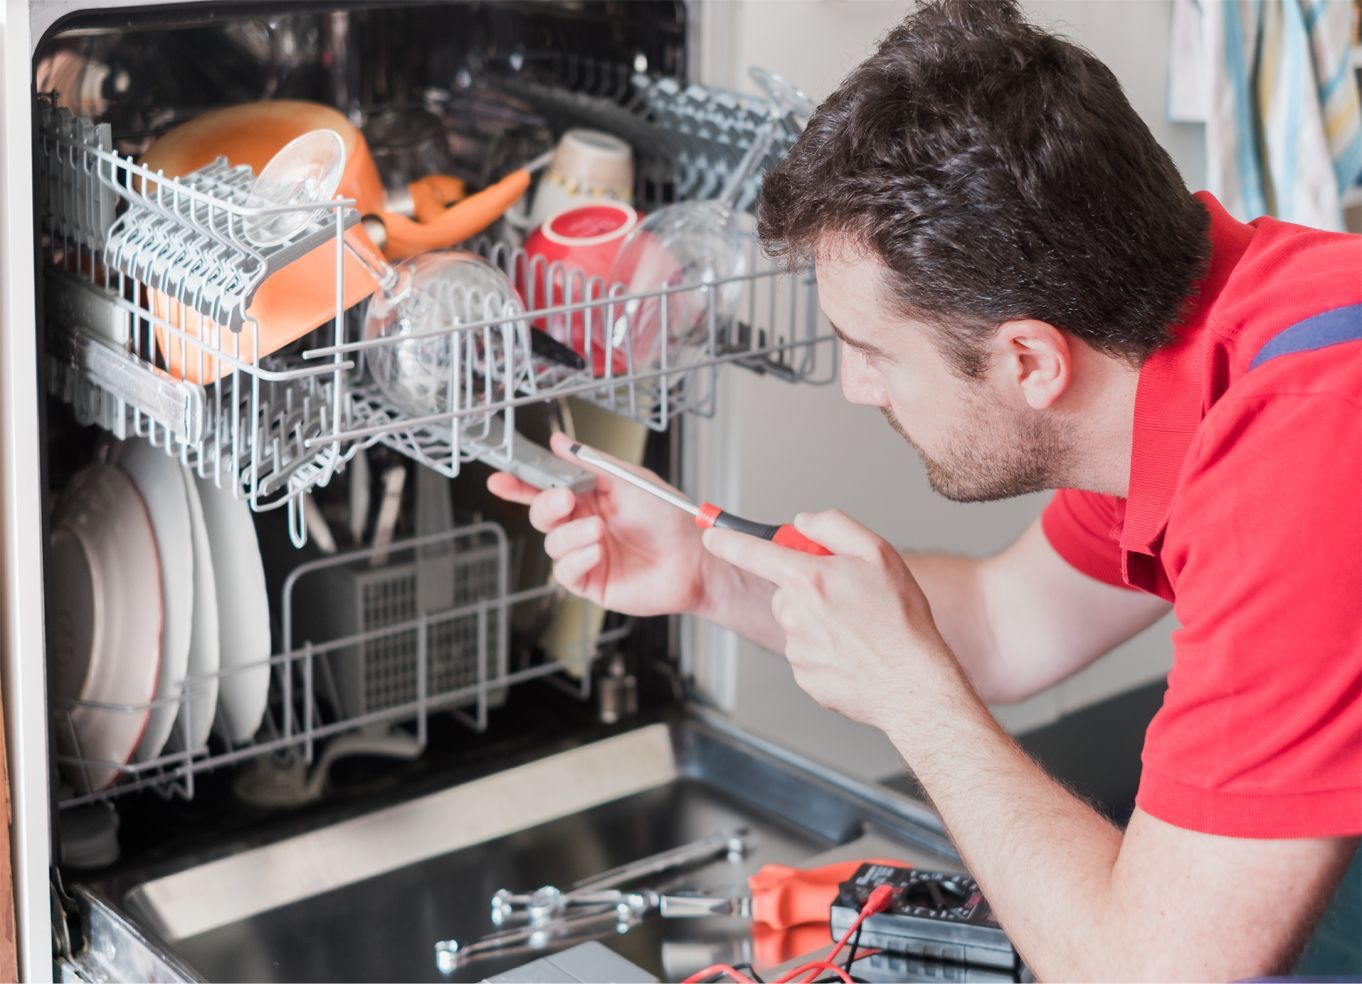 Dishwasher Repair Made Simple: DIY Solutions for Sparkling Clean Dishes